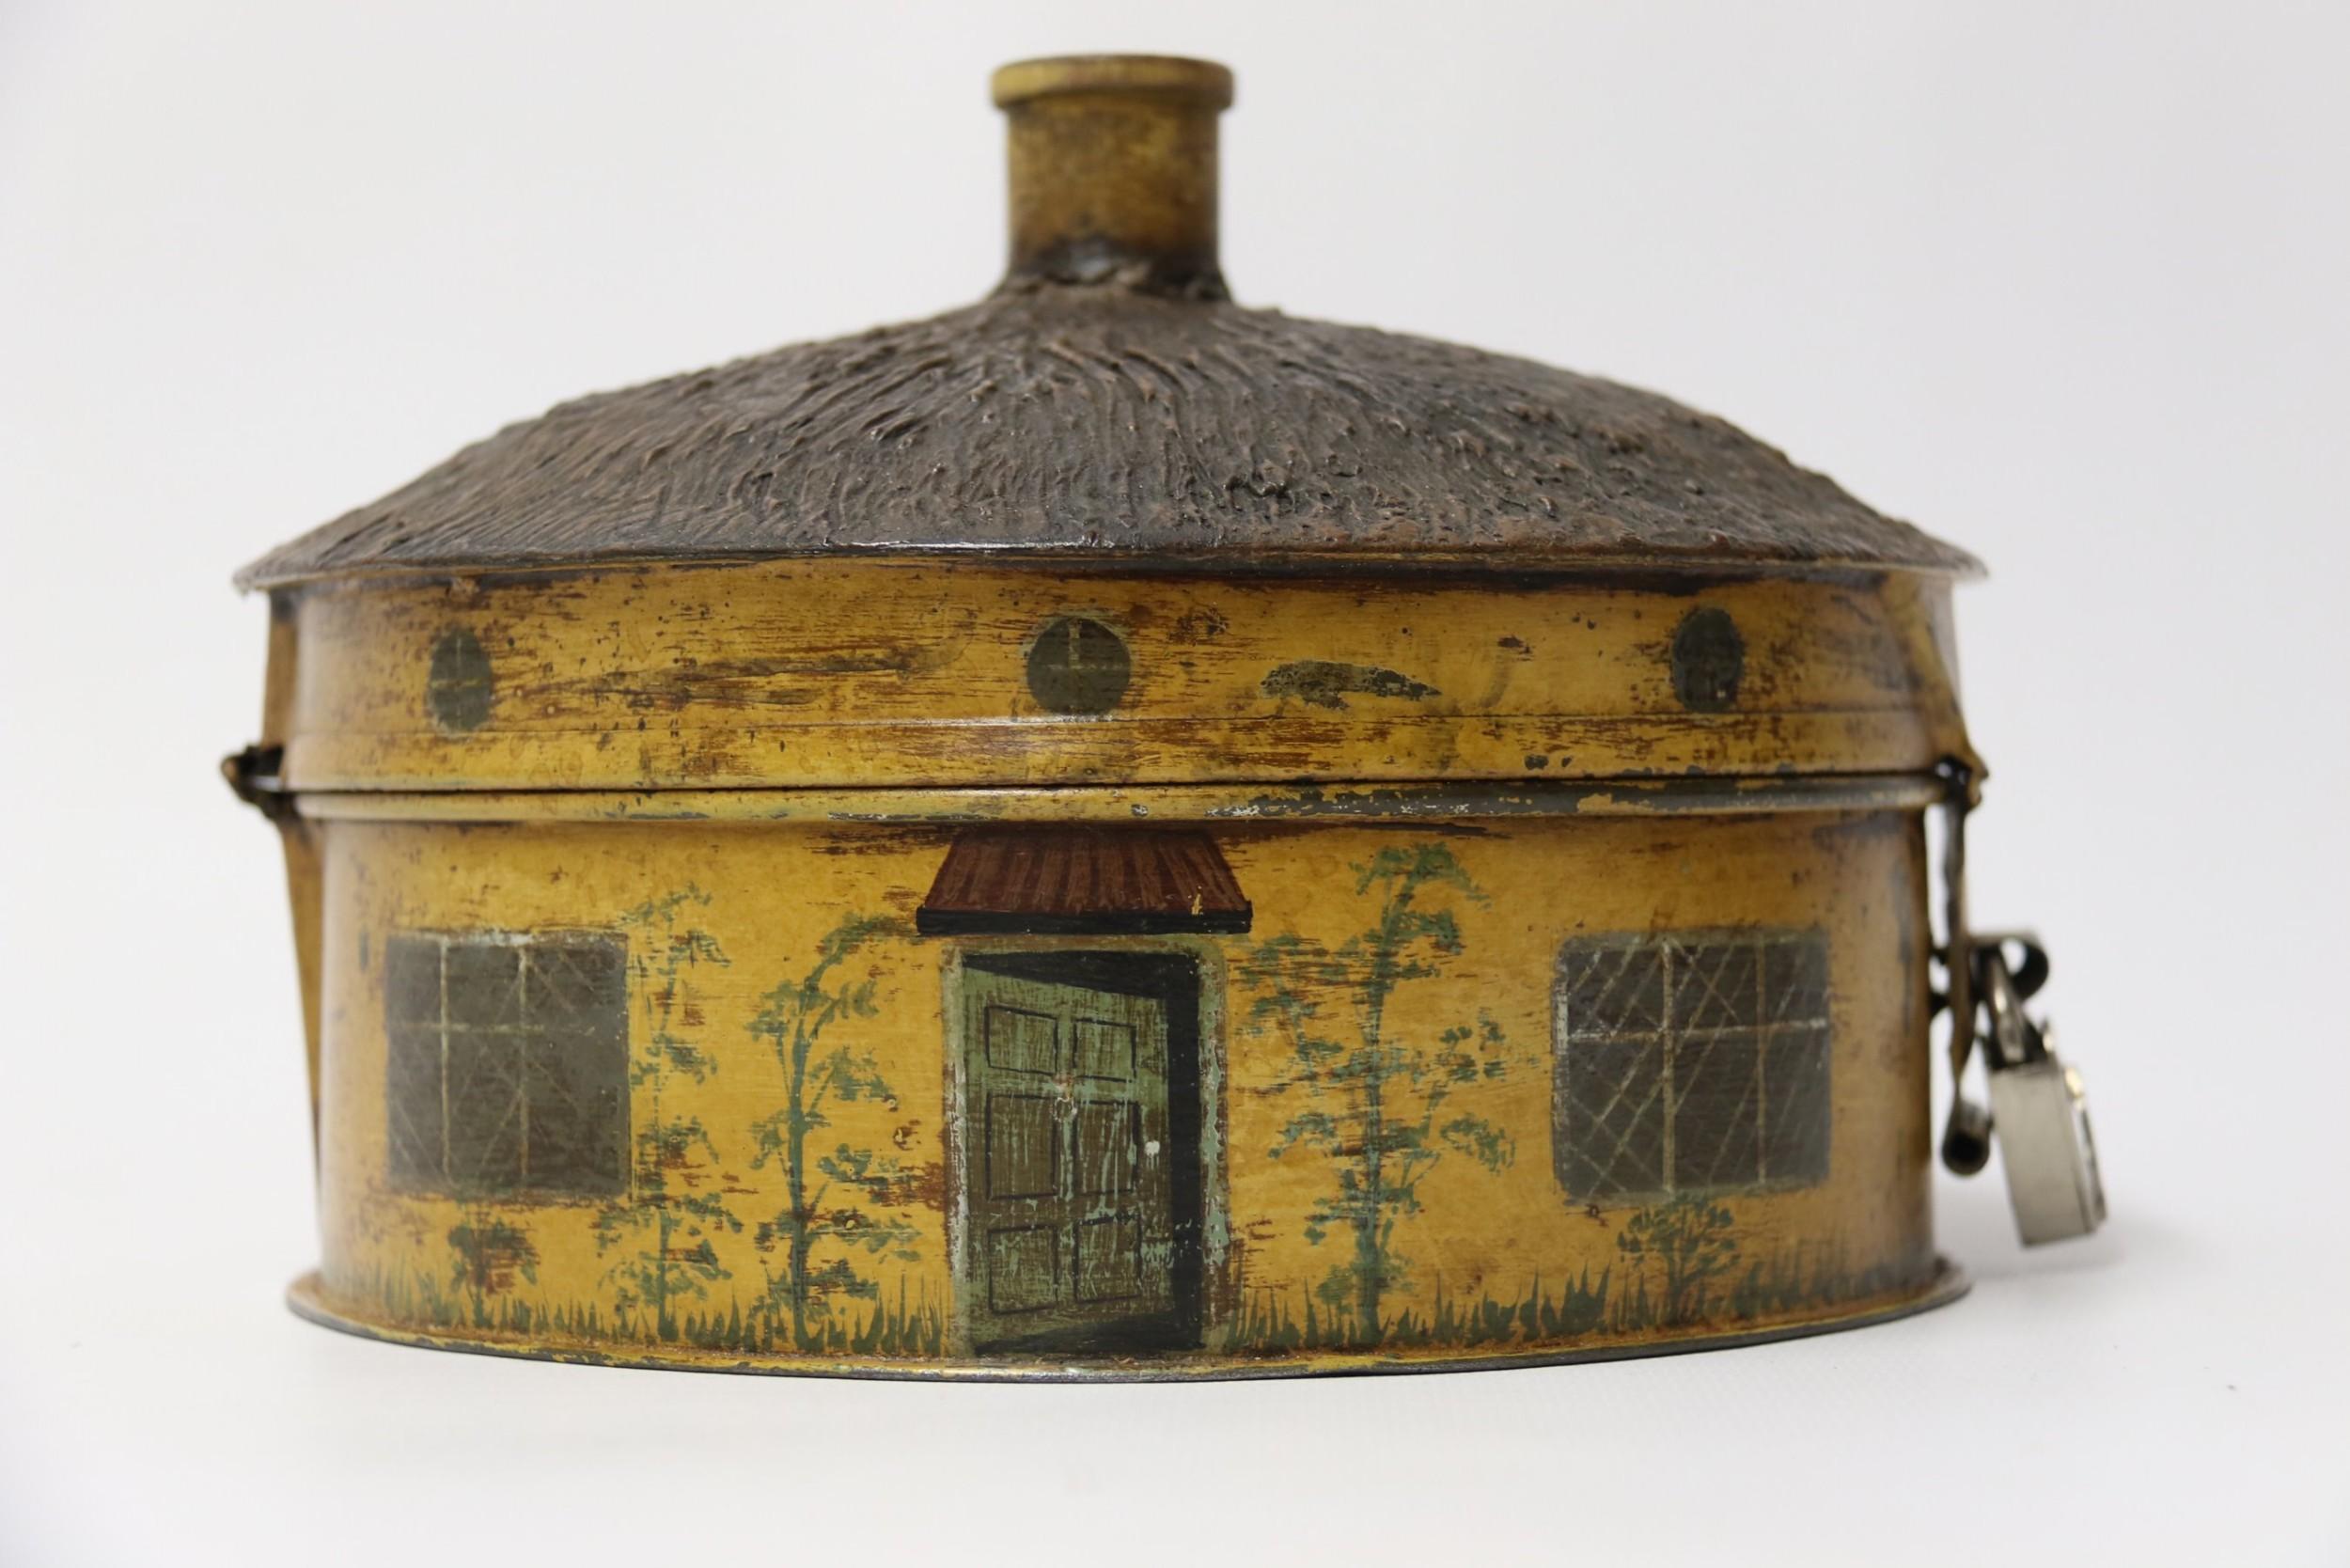 This wonderful box is made of steel, the interior is made from tin which has divisions for storing expensive spices.
The centre has the original grater for grating spices such as nutmeg and ginger. The box dates to the early Victorian period and